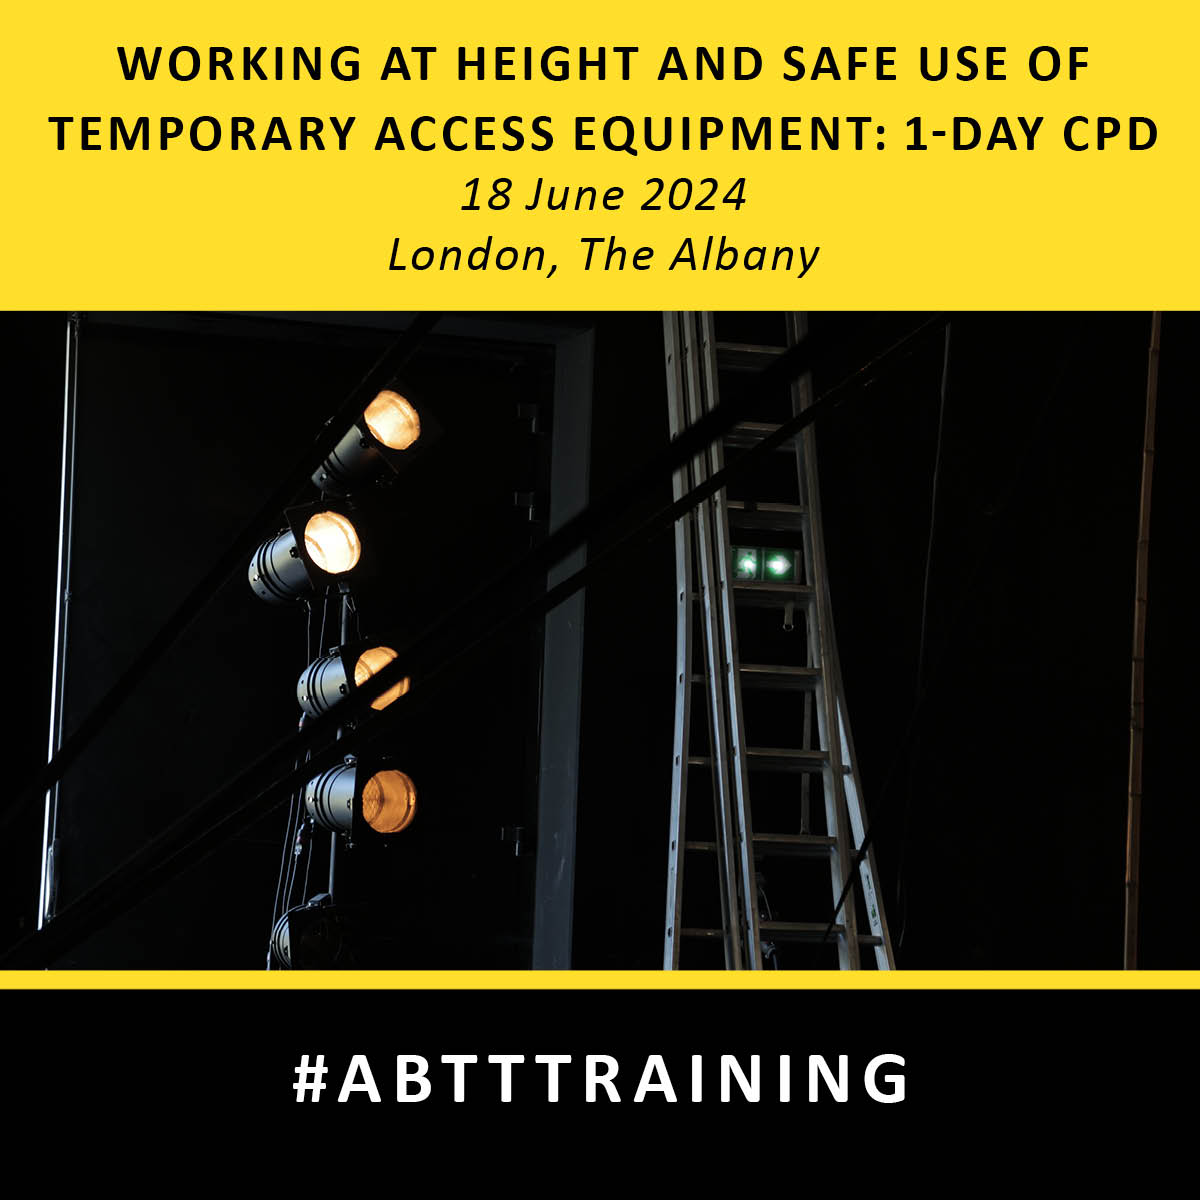 ONE-DAY CPD COURSE NOW BOOKING: ABTT Working at Height and Safe Use of Temporary Access Equipment. London, The Albany, 18th June, 2024.

Book here: abtt.org.uk/events/one-day…

#ABTTTraining